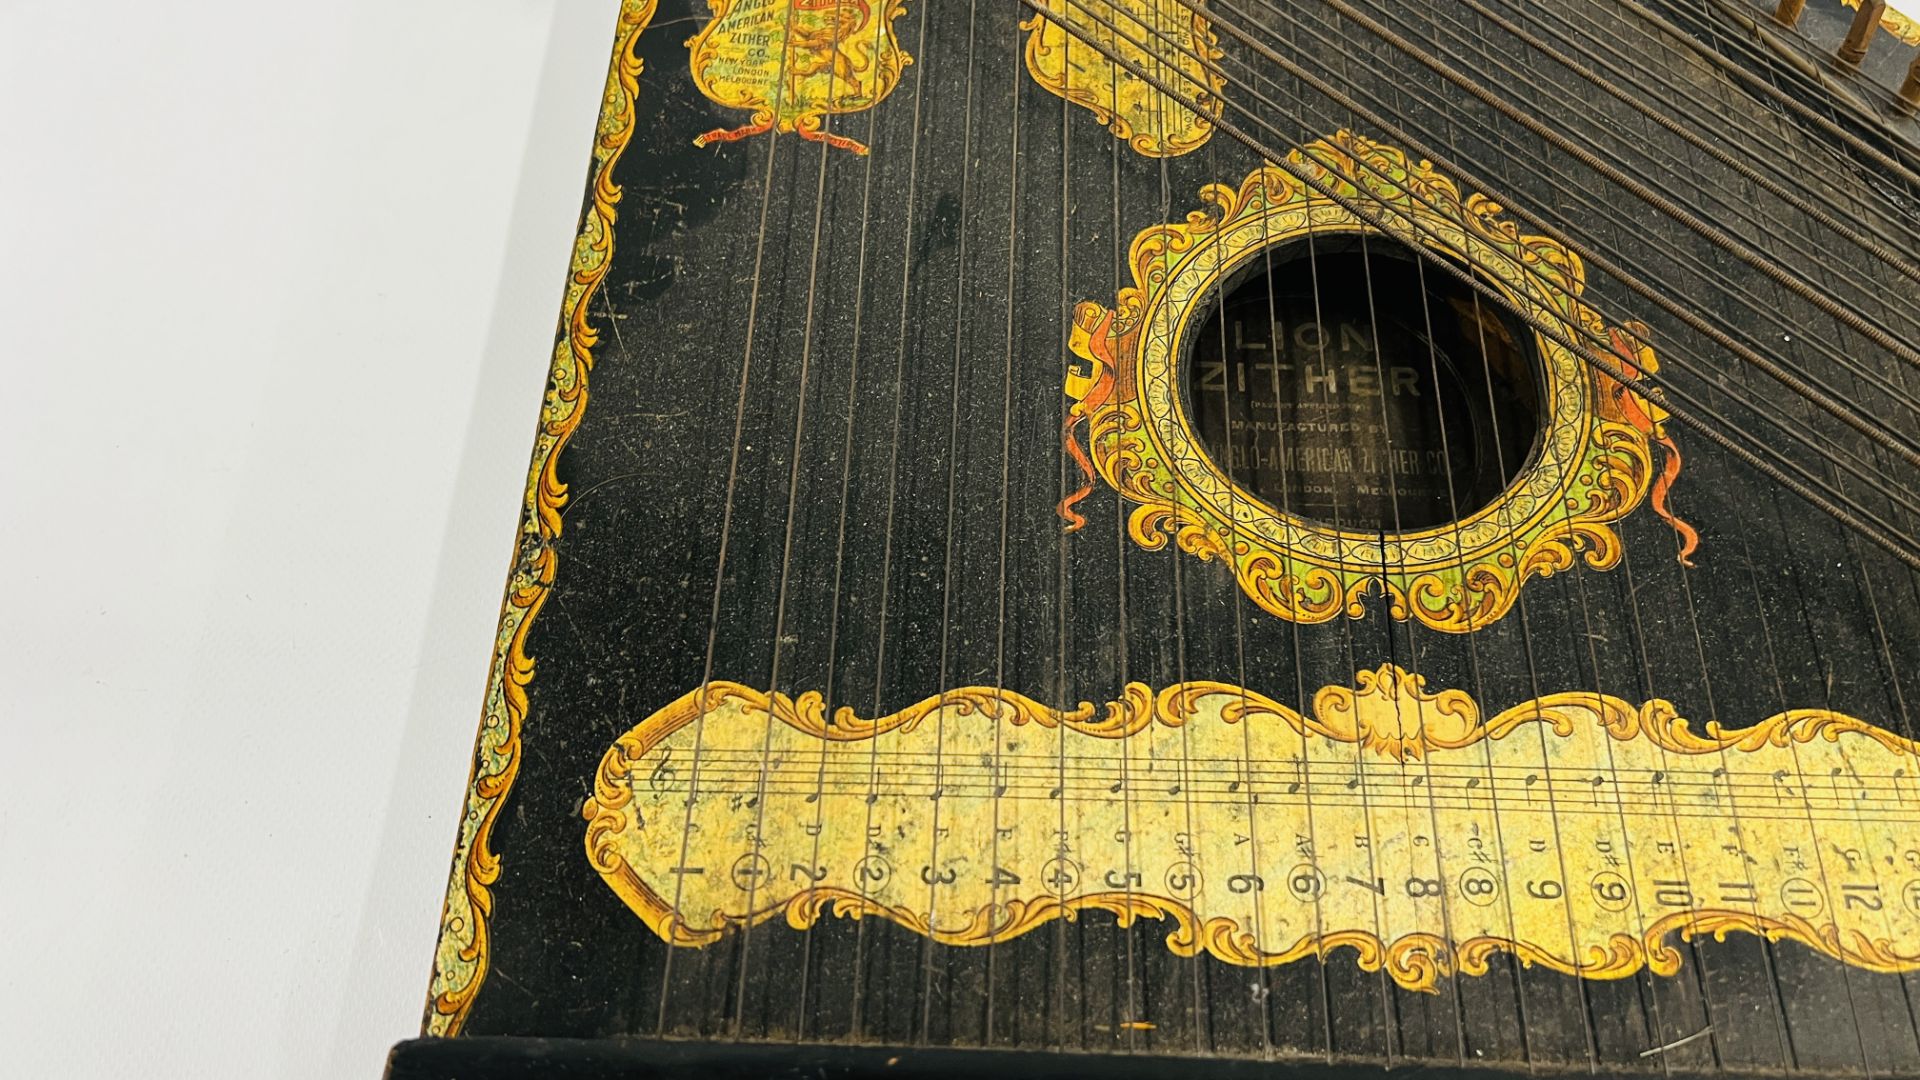 A VINTAGE "THE ANGLO AMERICAN LION ZITHER" MANUFACTURED BY THE ANGLO AMERICAN ZITHER Co NEW YORK - Image 7 of 13